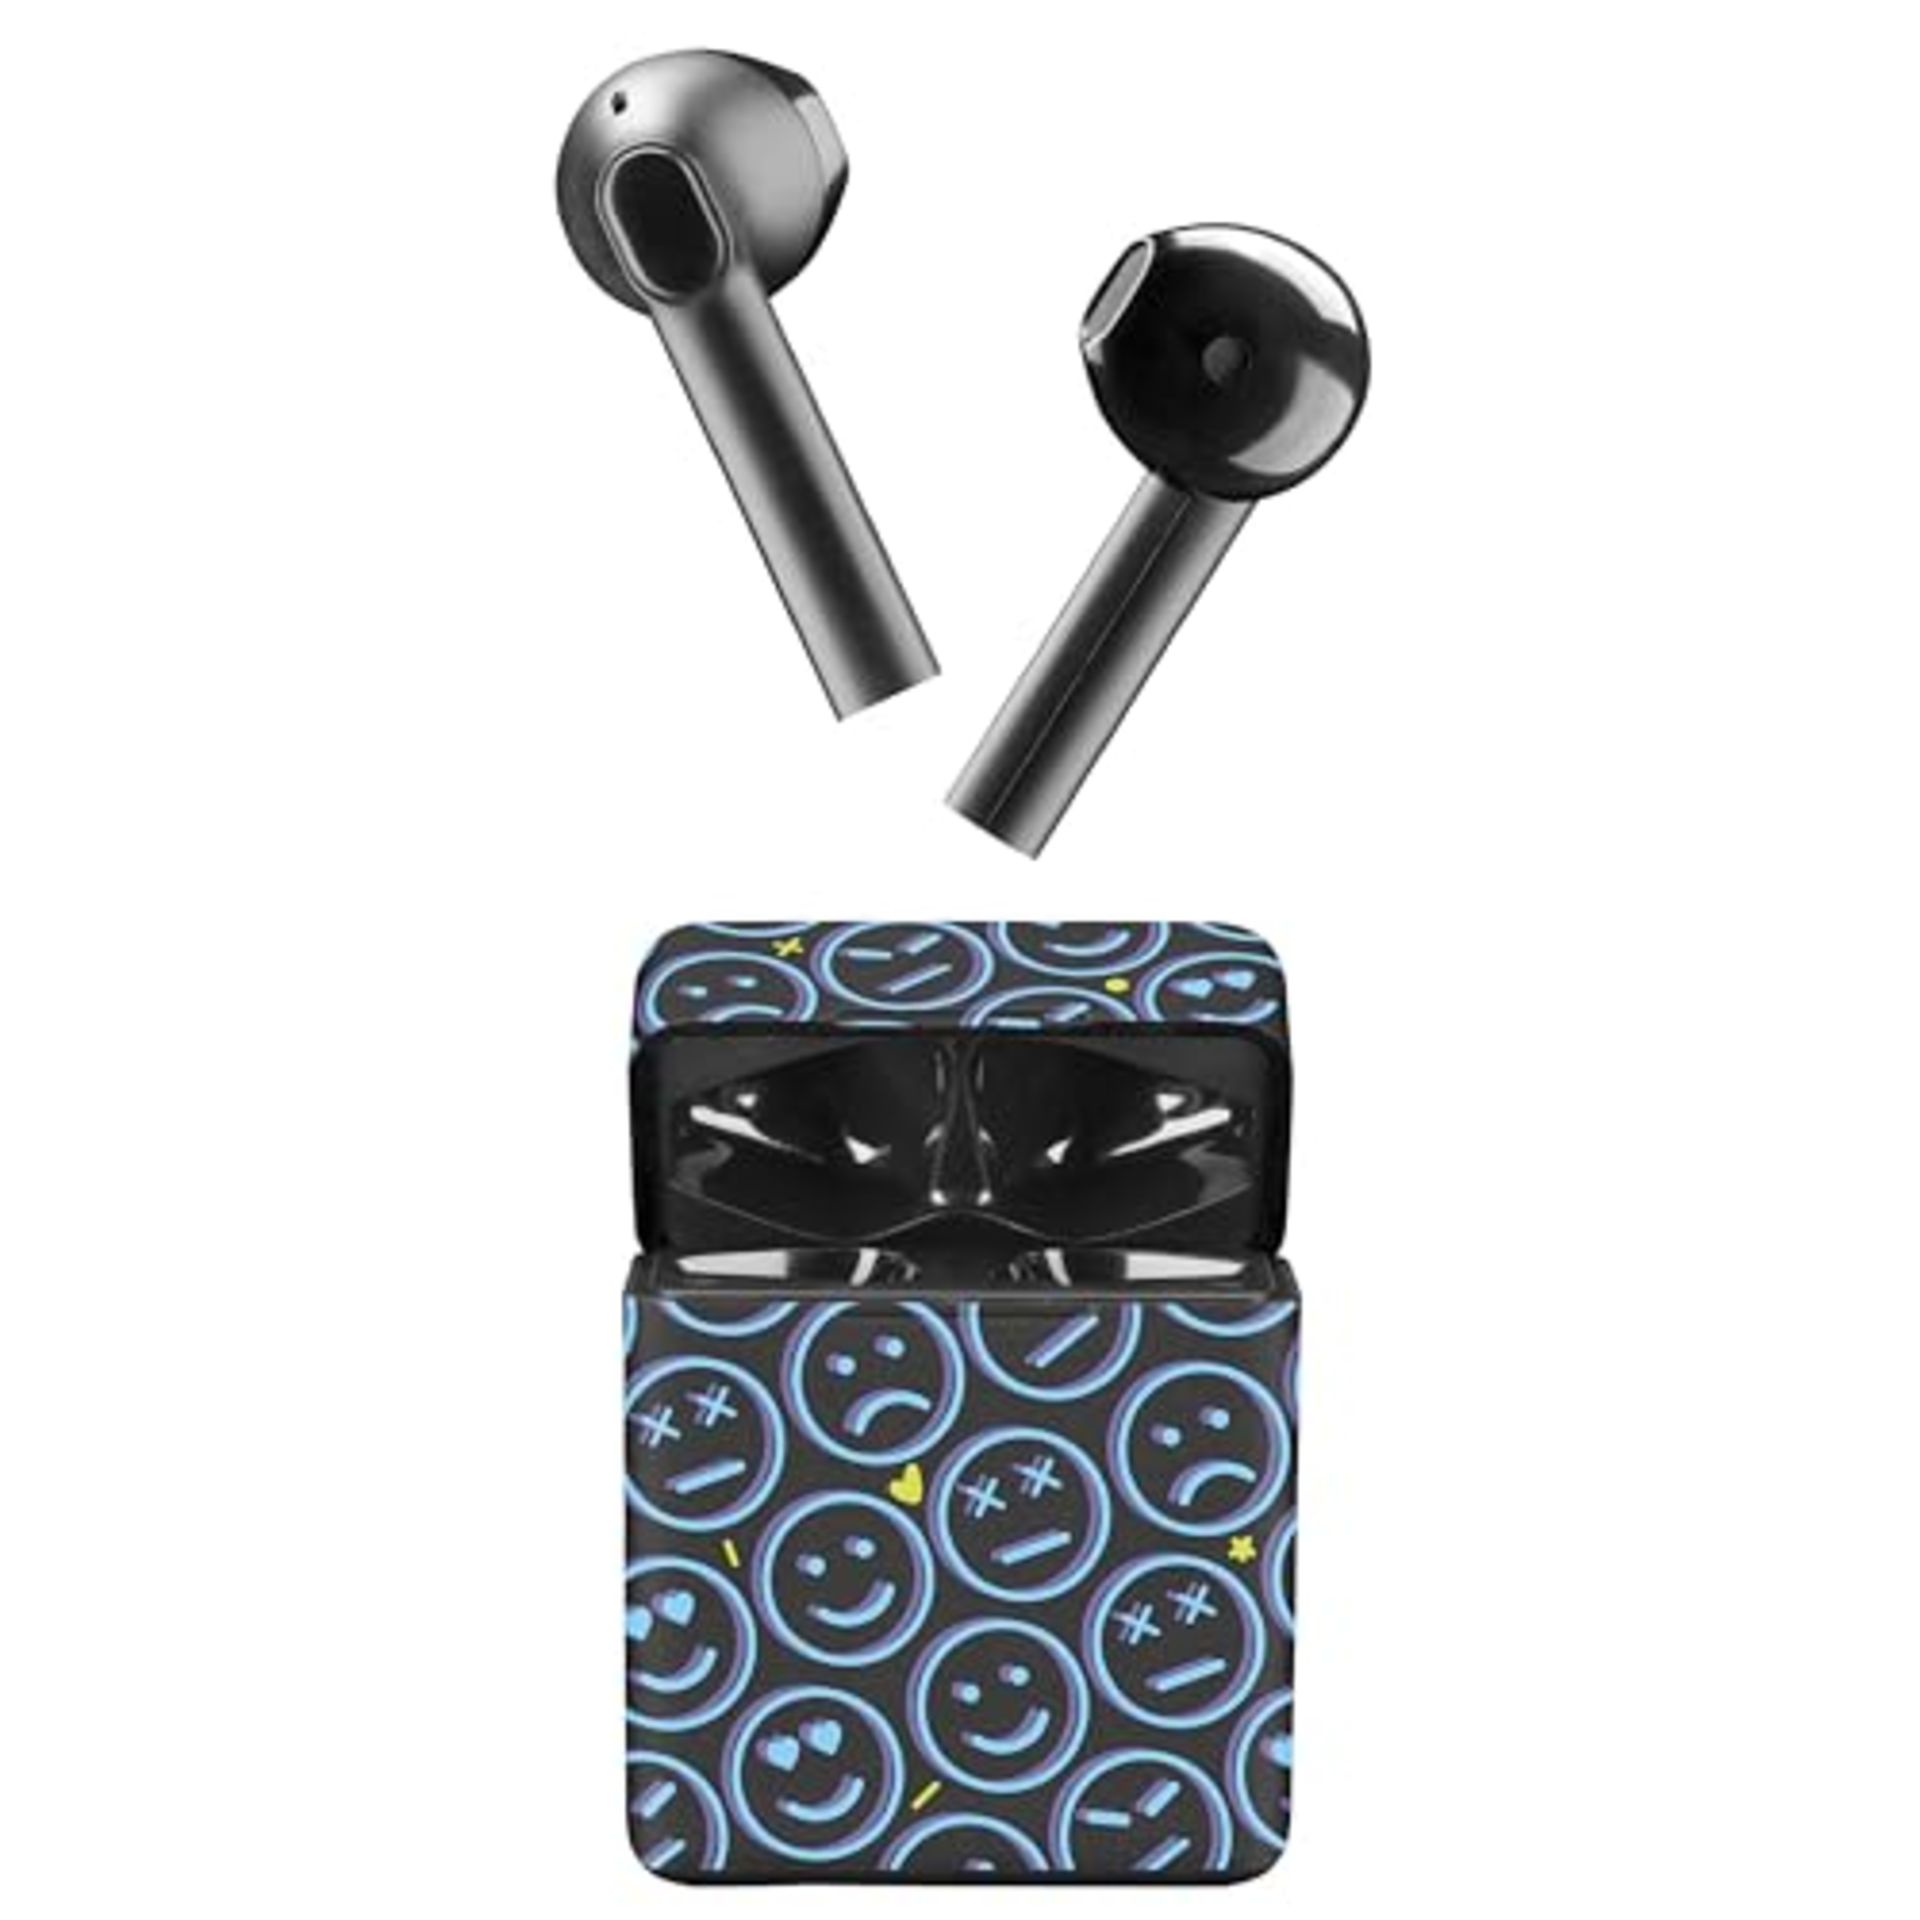 Music Sound - SHOWY - TWS Bluetooth Earbuds in Capsule, with Charging Case in various